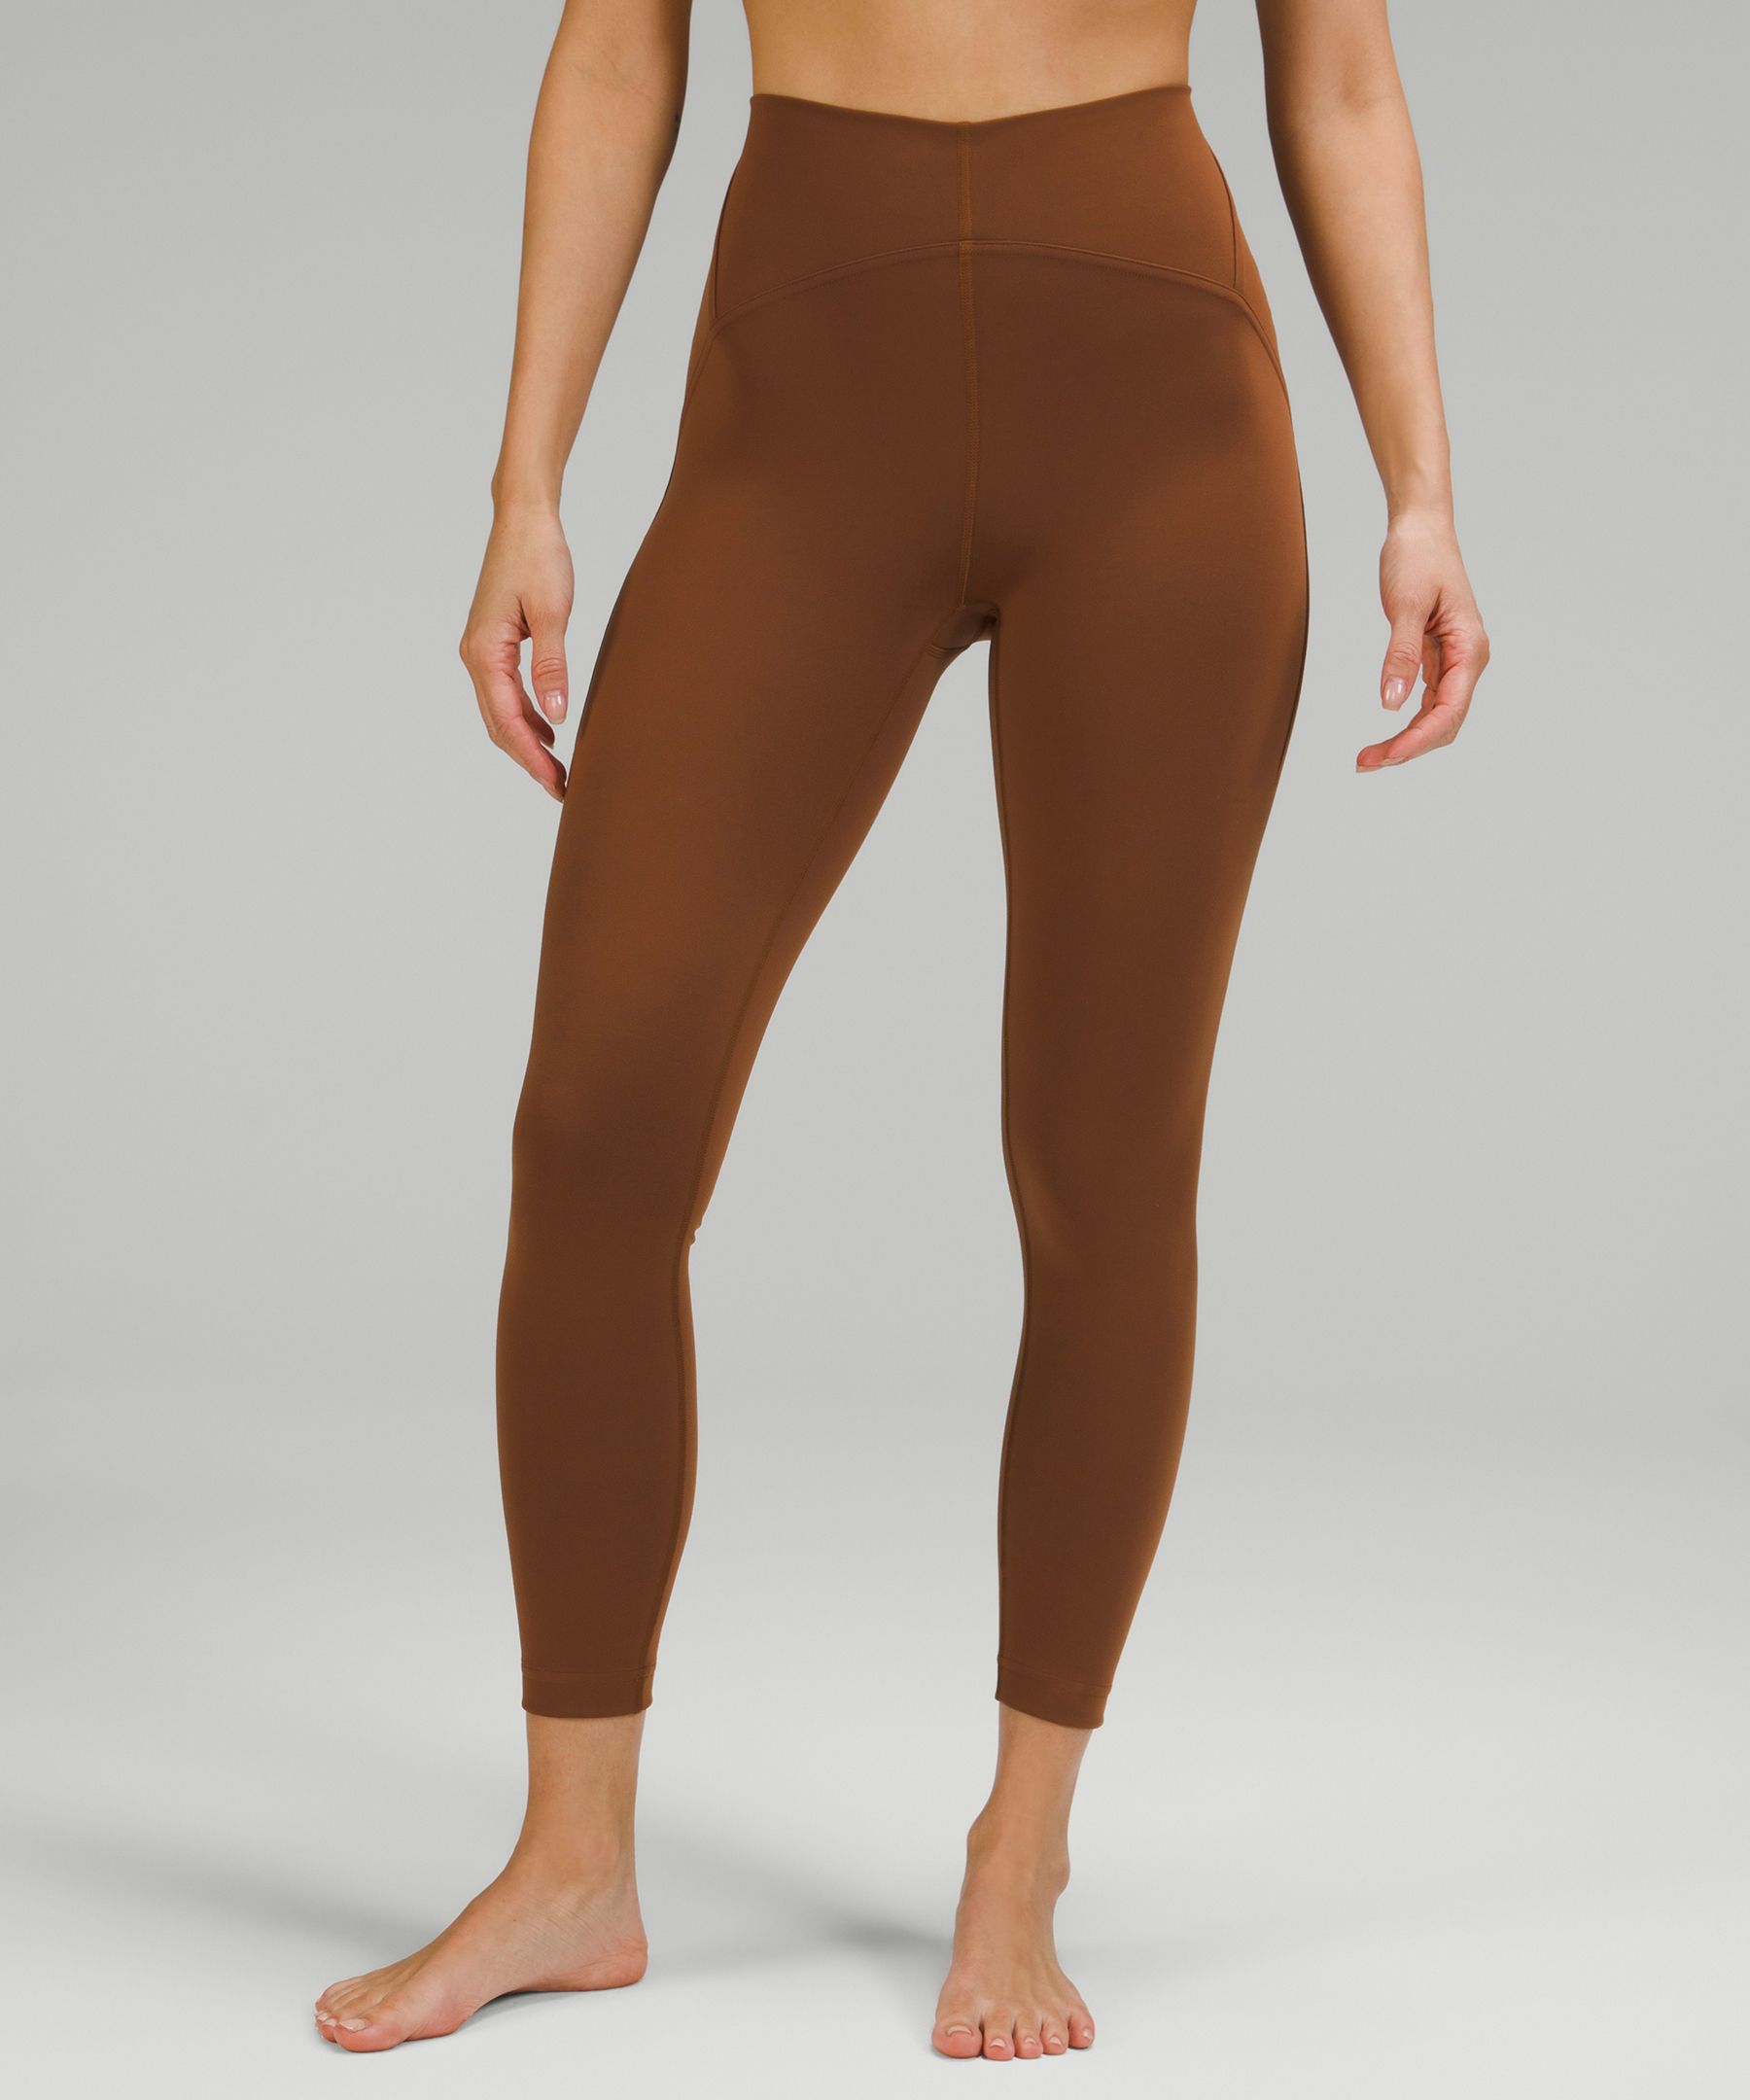 InStill High-Rise Tight 24 *Asia Fit